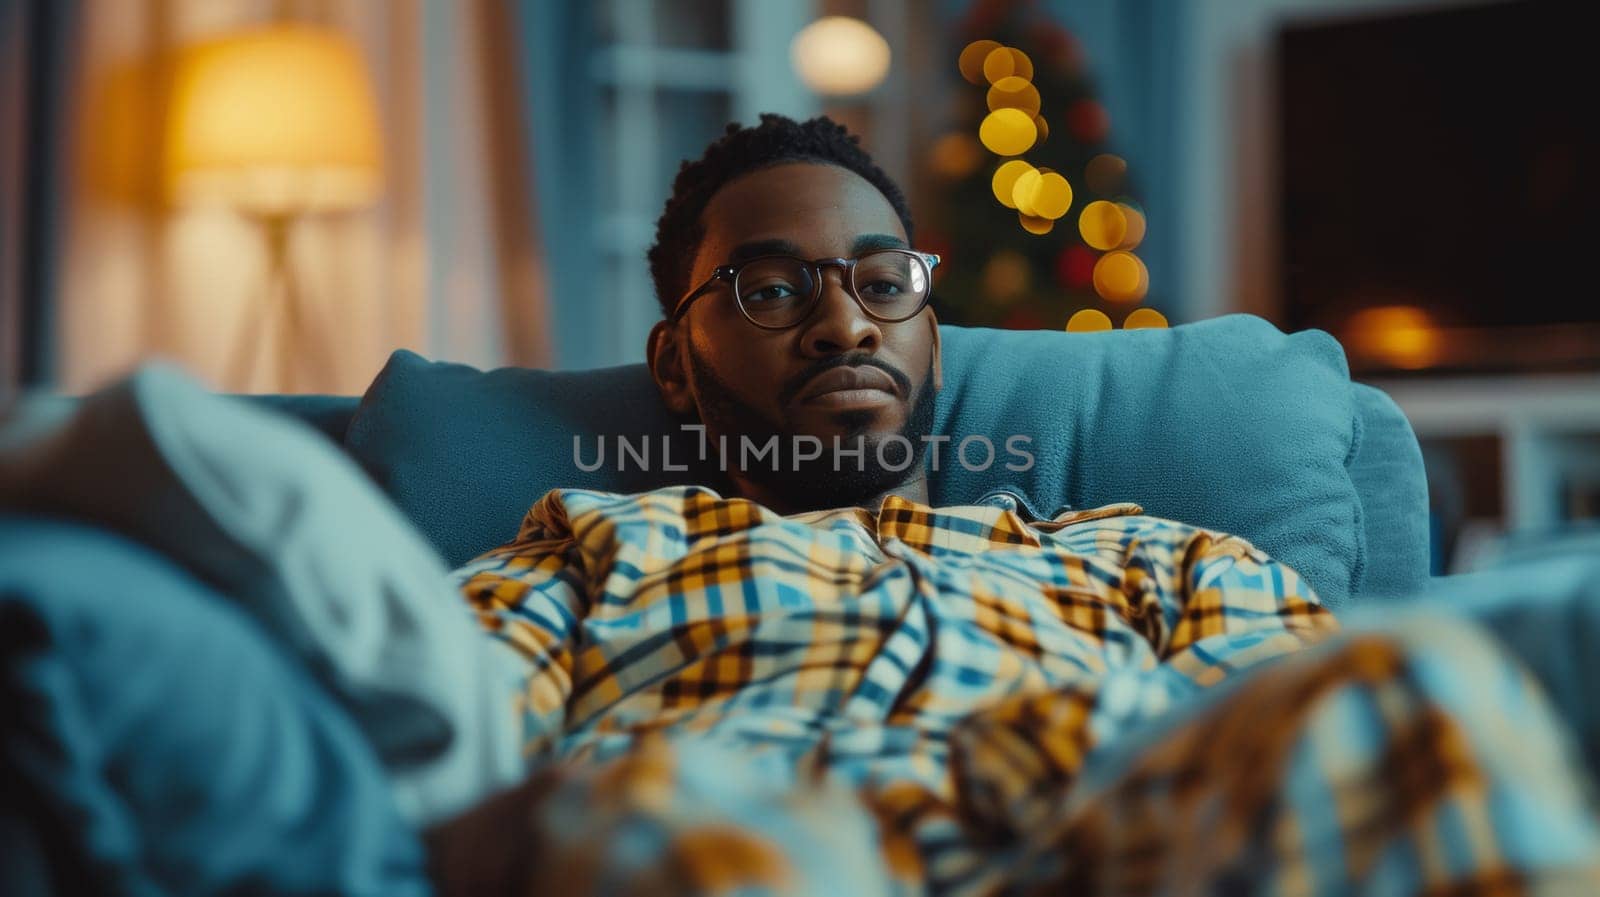 A man in pajamas sitting on a couch with his eyes closed